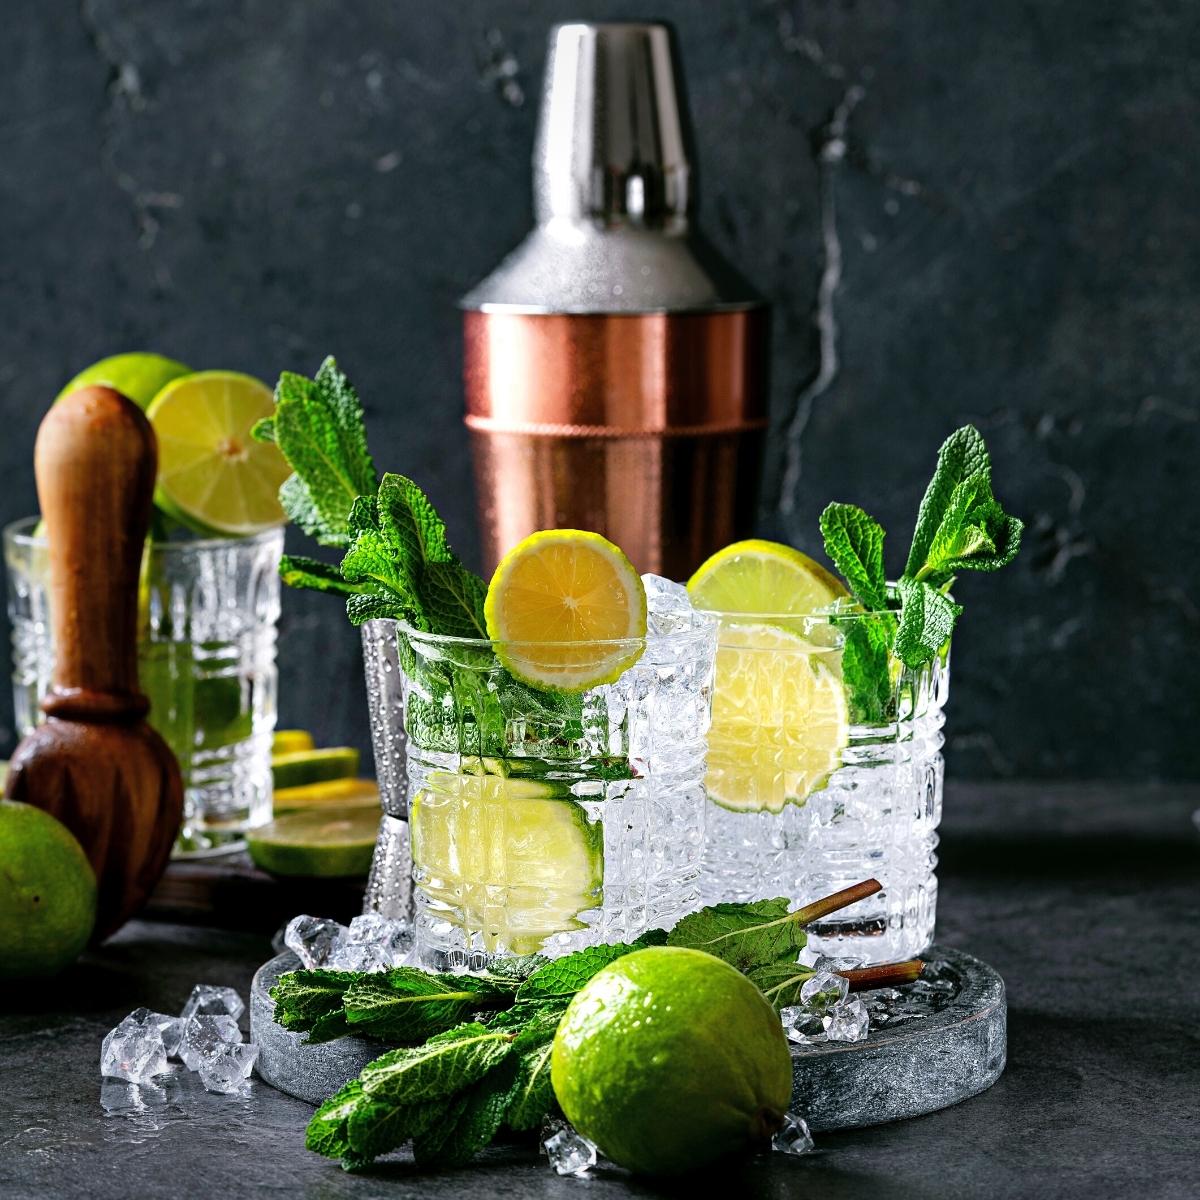 A copper shaker surrounded with glassware that's full of cube ice and lime wheels with mint sprigs sticking out. There are whole limes and a muddler in the picture too.